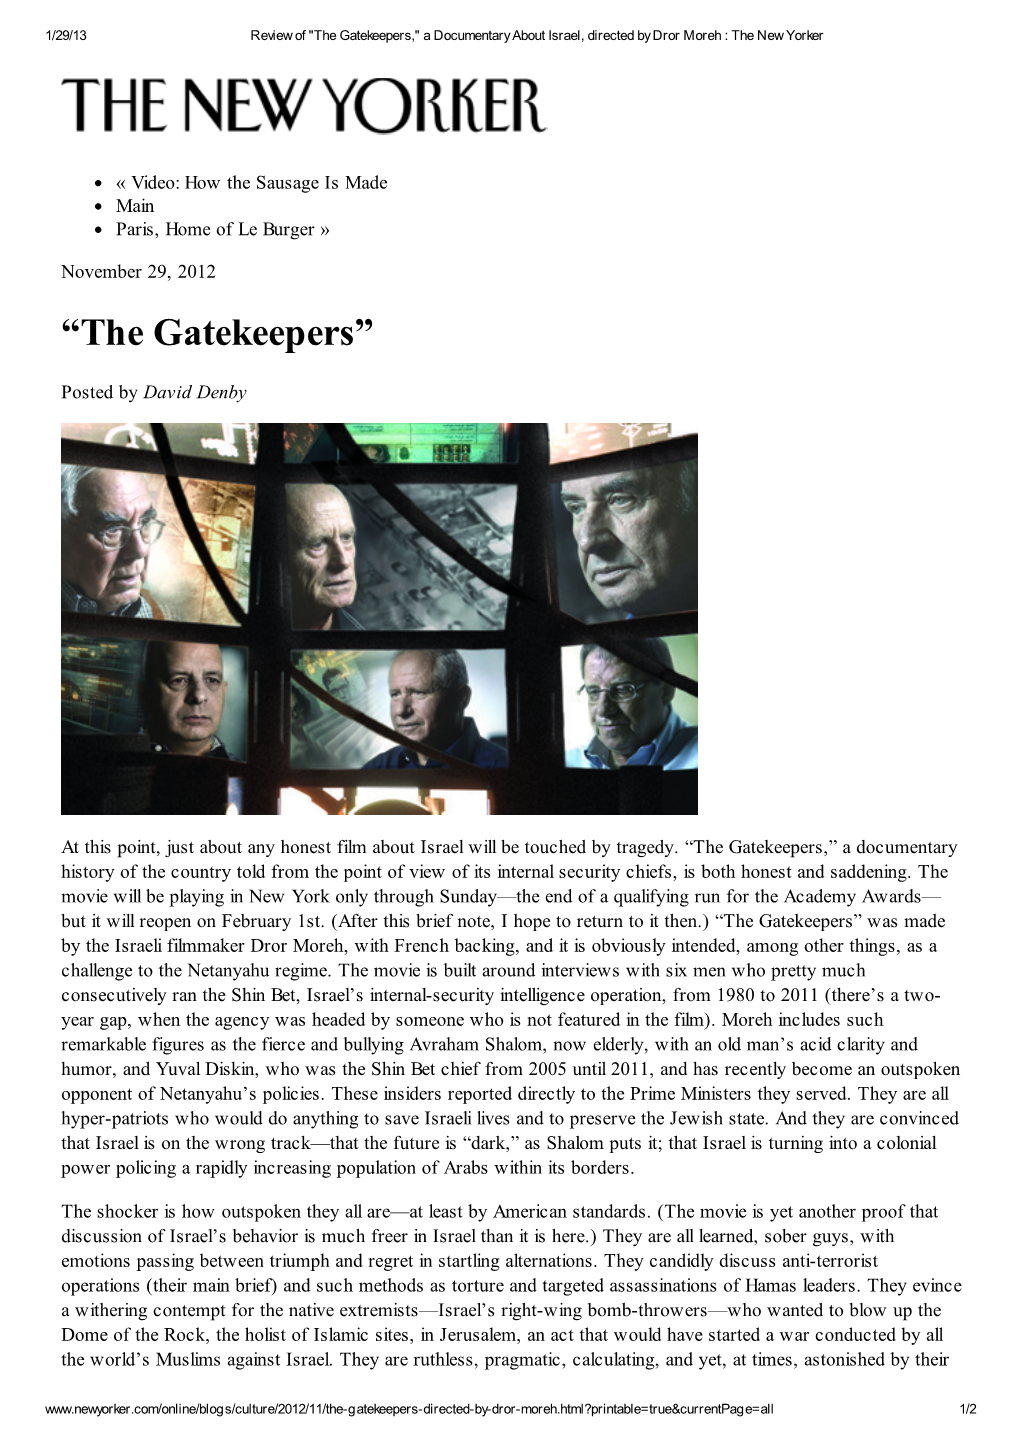 “The Gatekeepers”